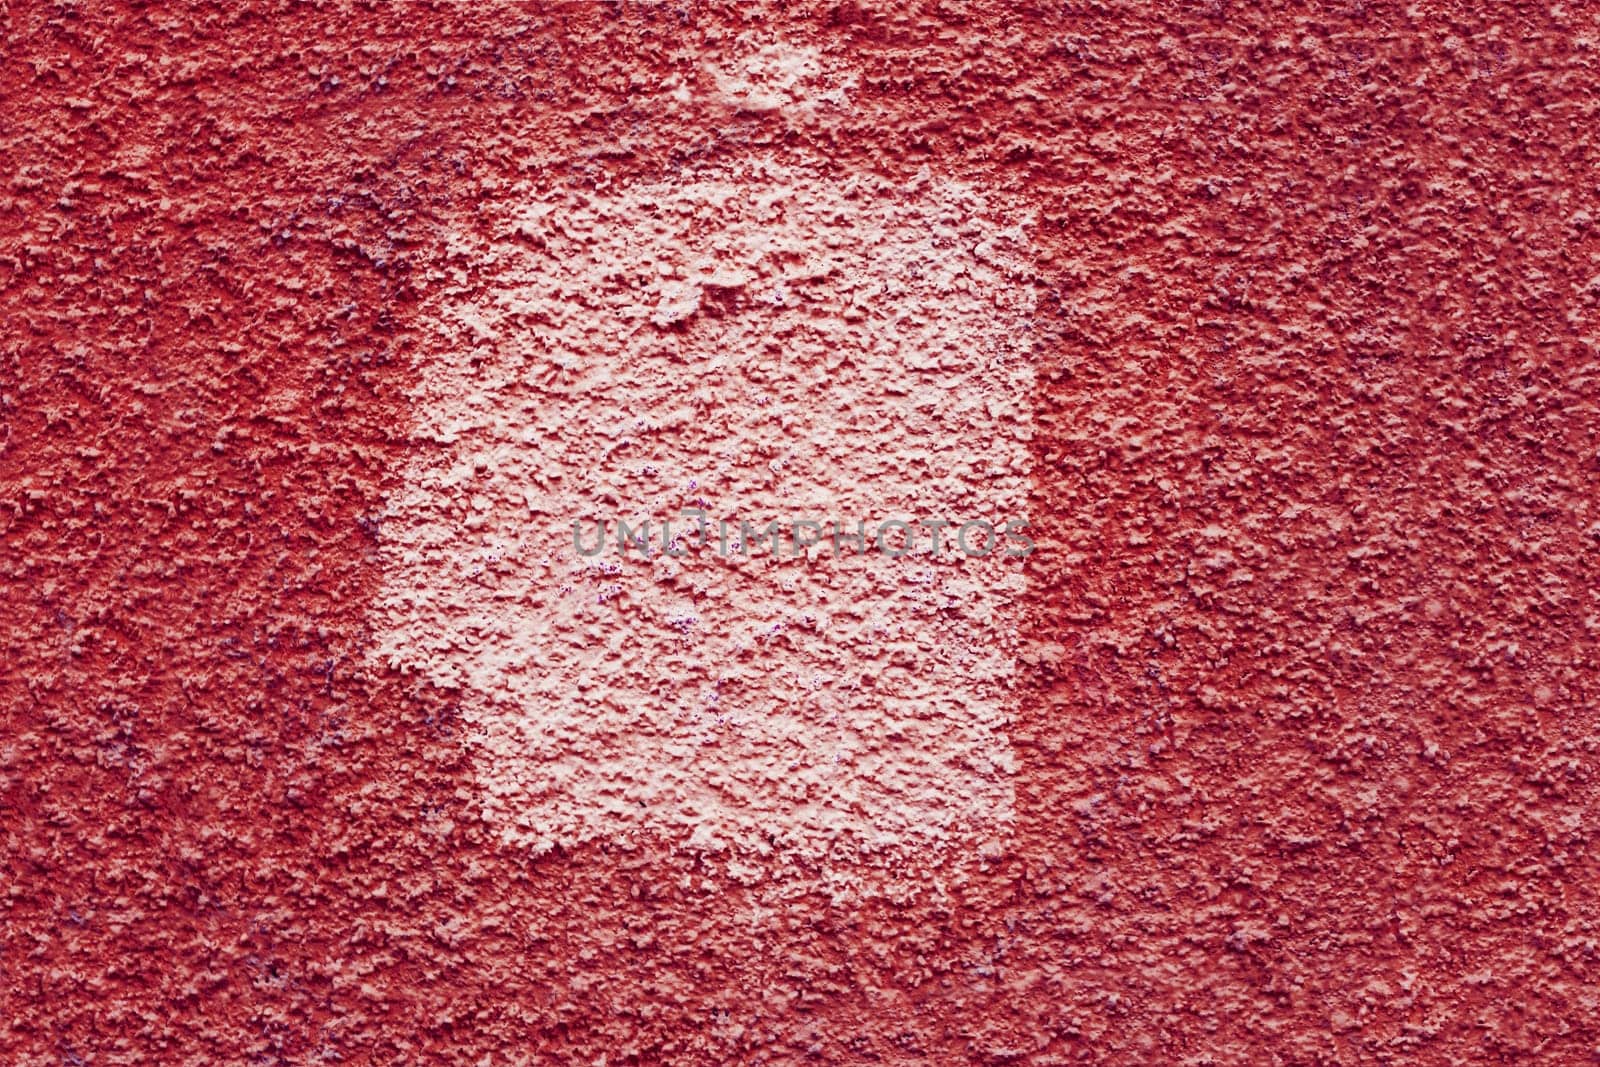 Red wall with a white square-shaped spot. Texture of old plaster with stain.